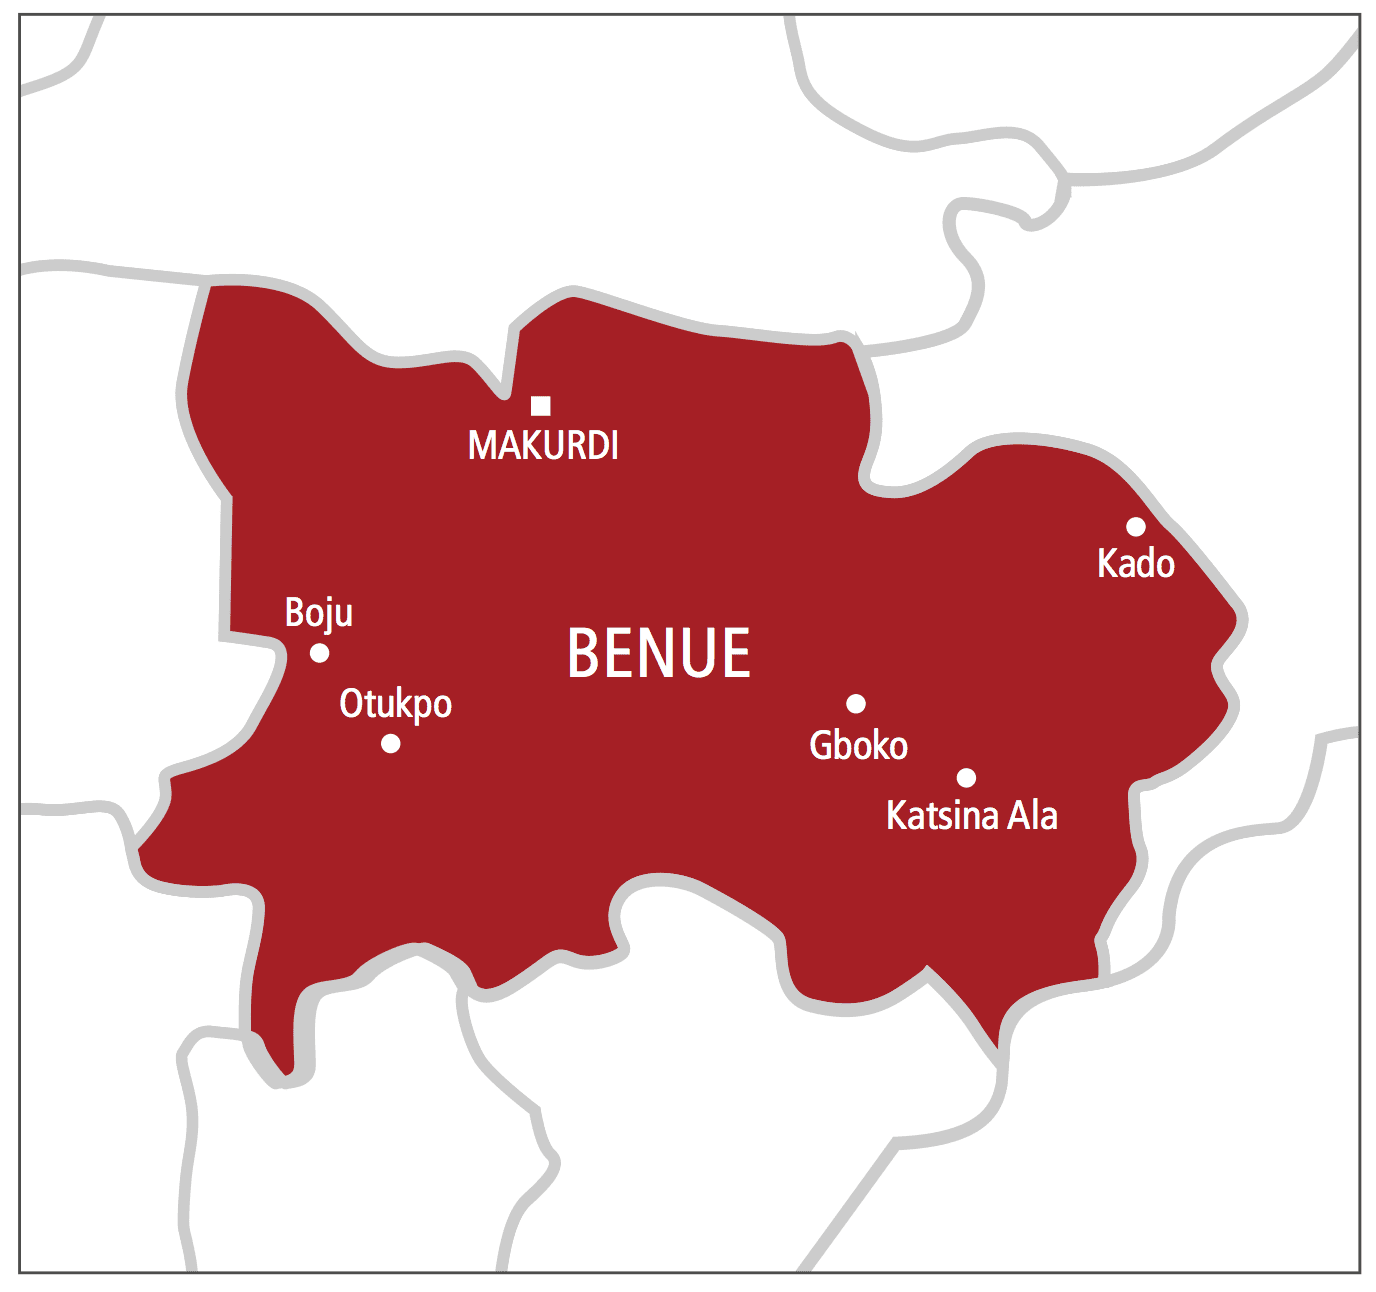 https://theeagleonline.com.ng/wp-content/uploads/2020/09/Benue-map.png